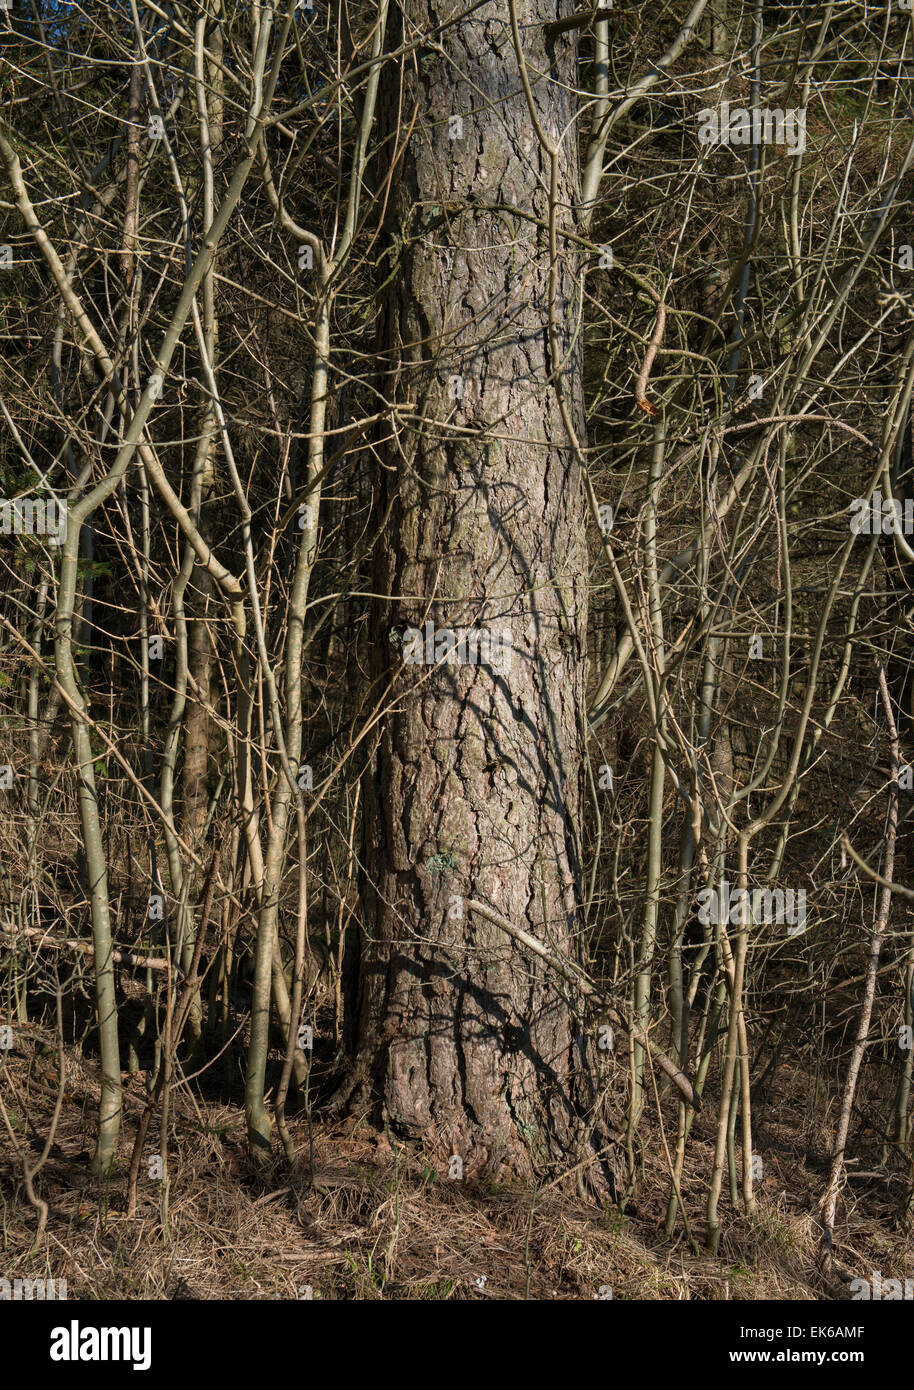 MAture tree surrounded by new growth saplings Stock Photo